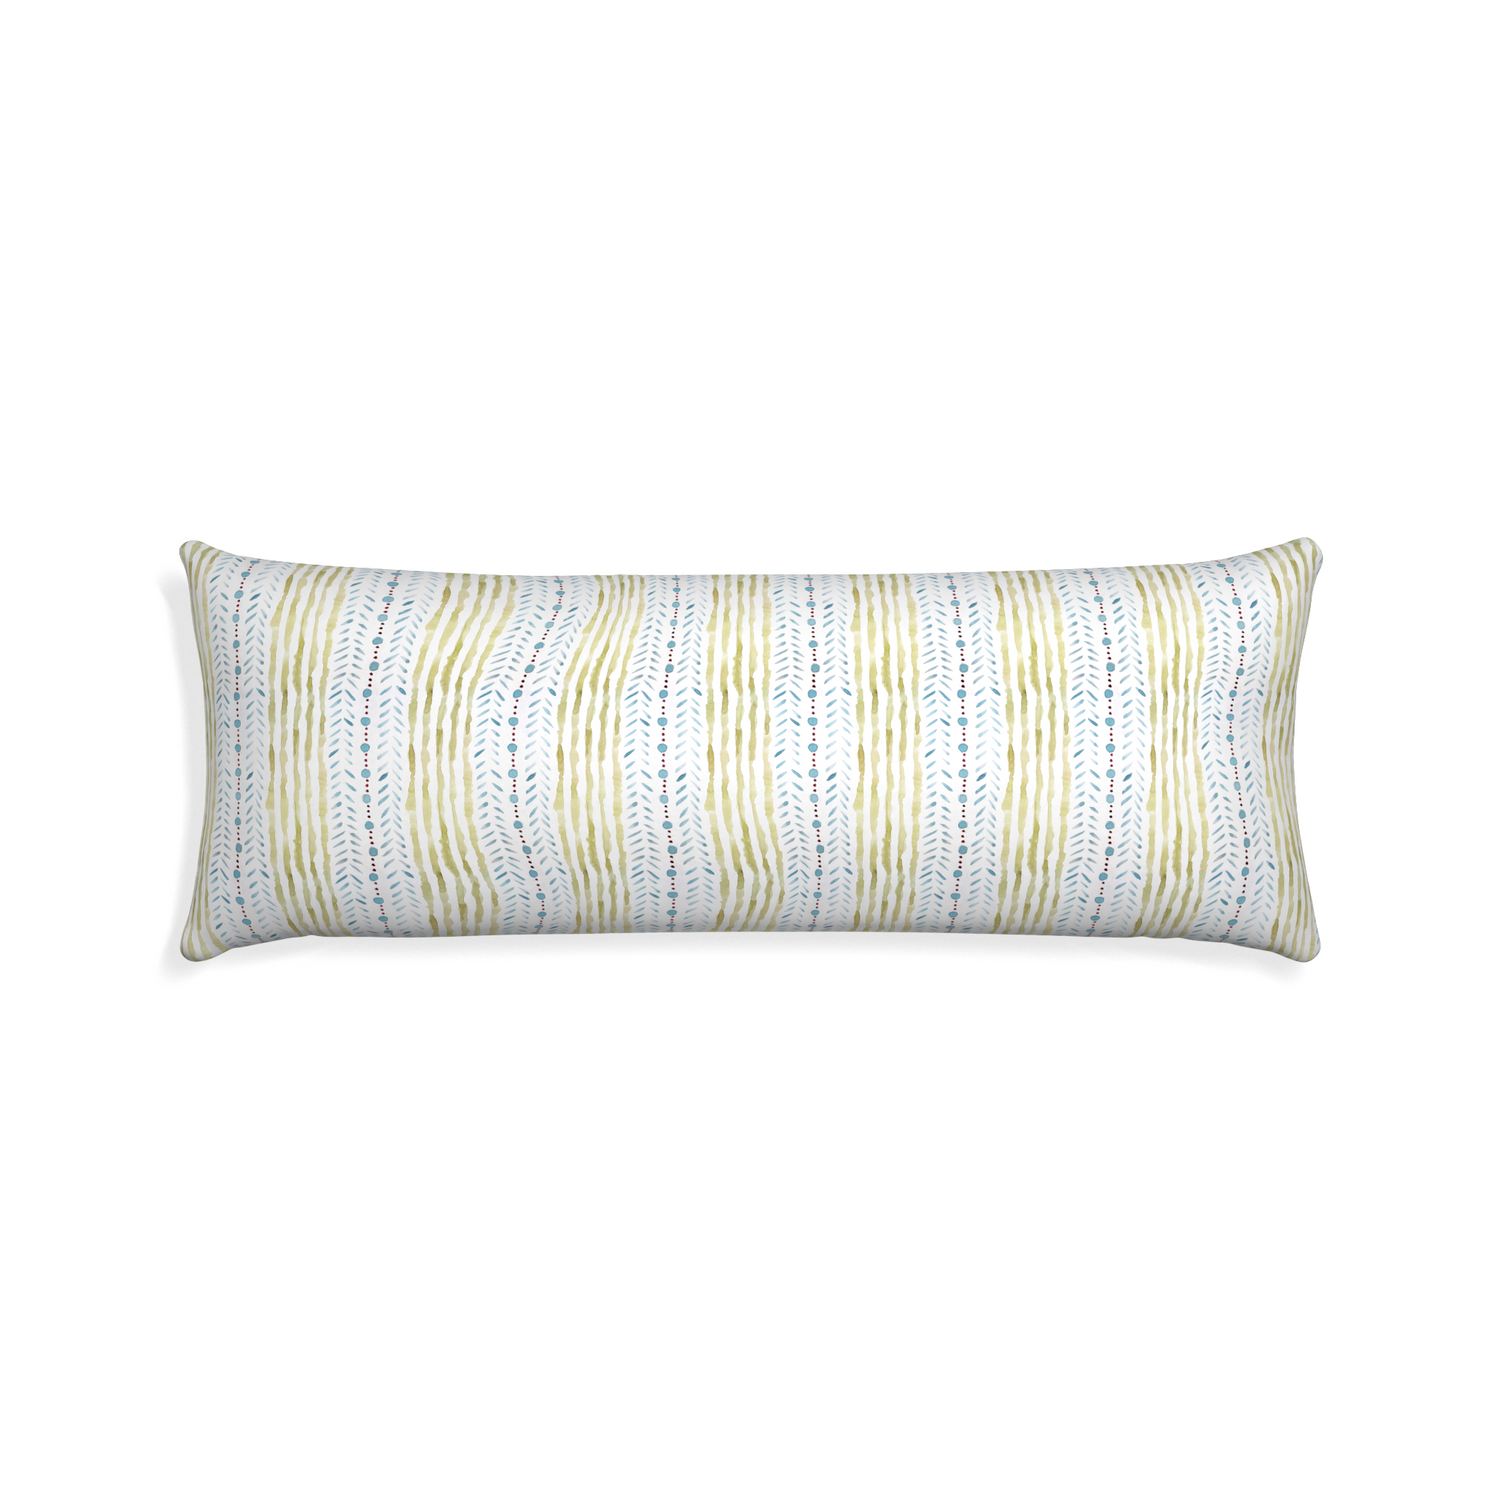 Xl-lumbar julia custom blue & green stripedpillow with none on white background